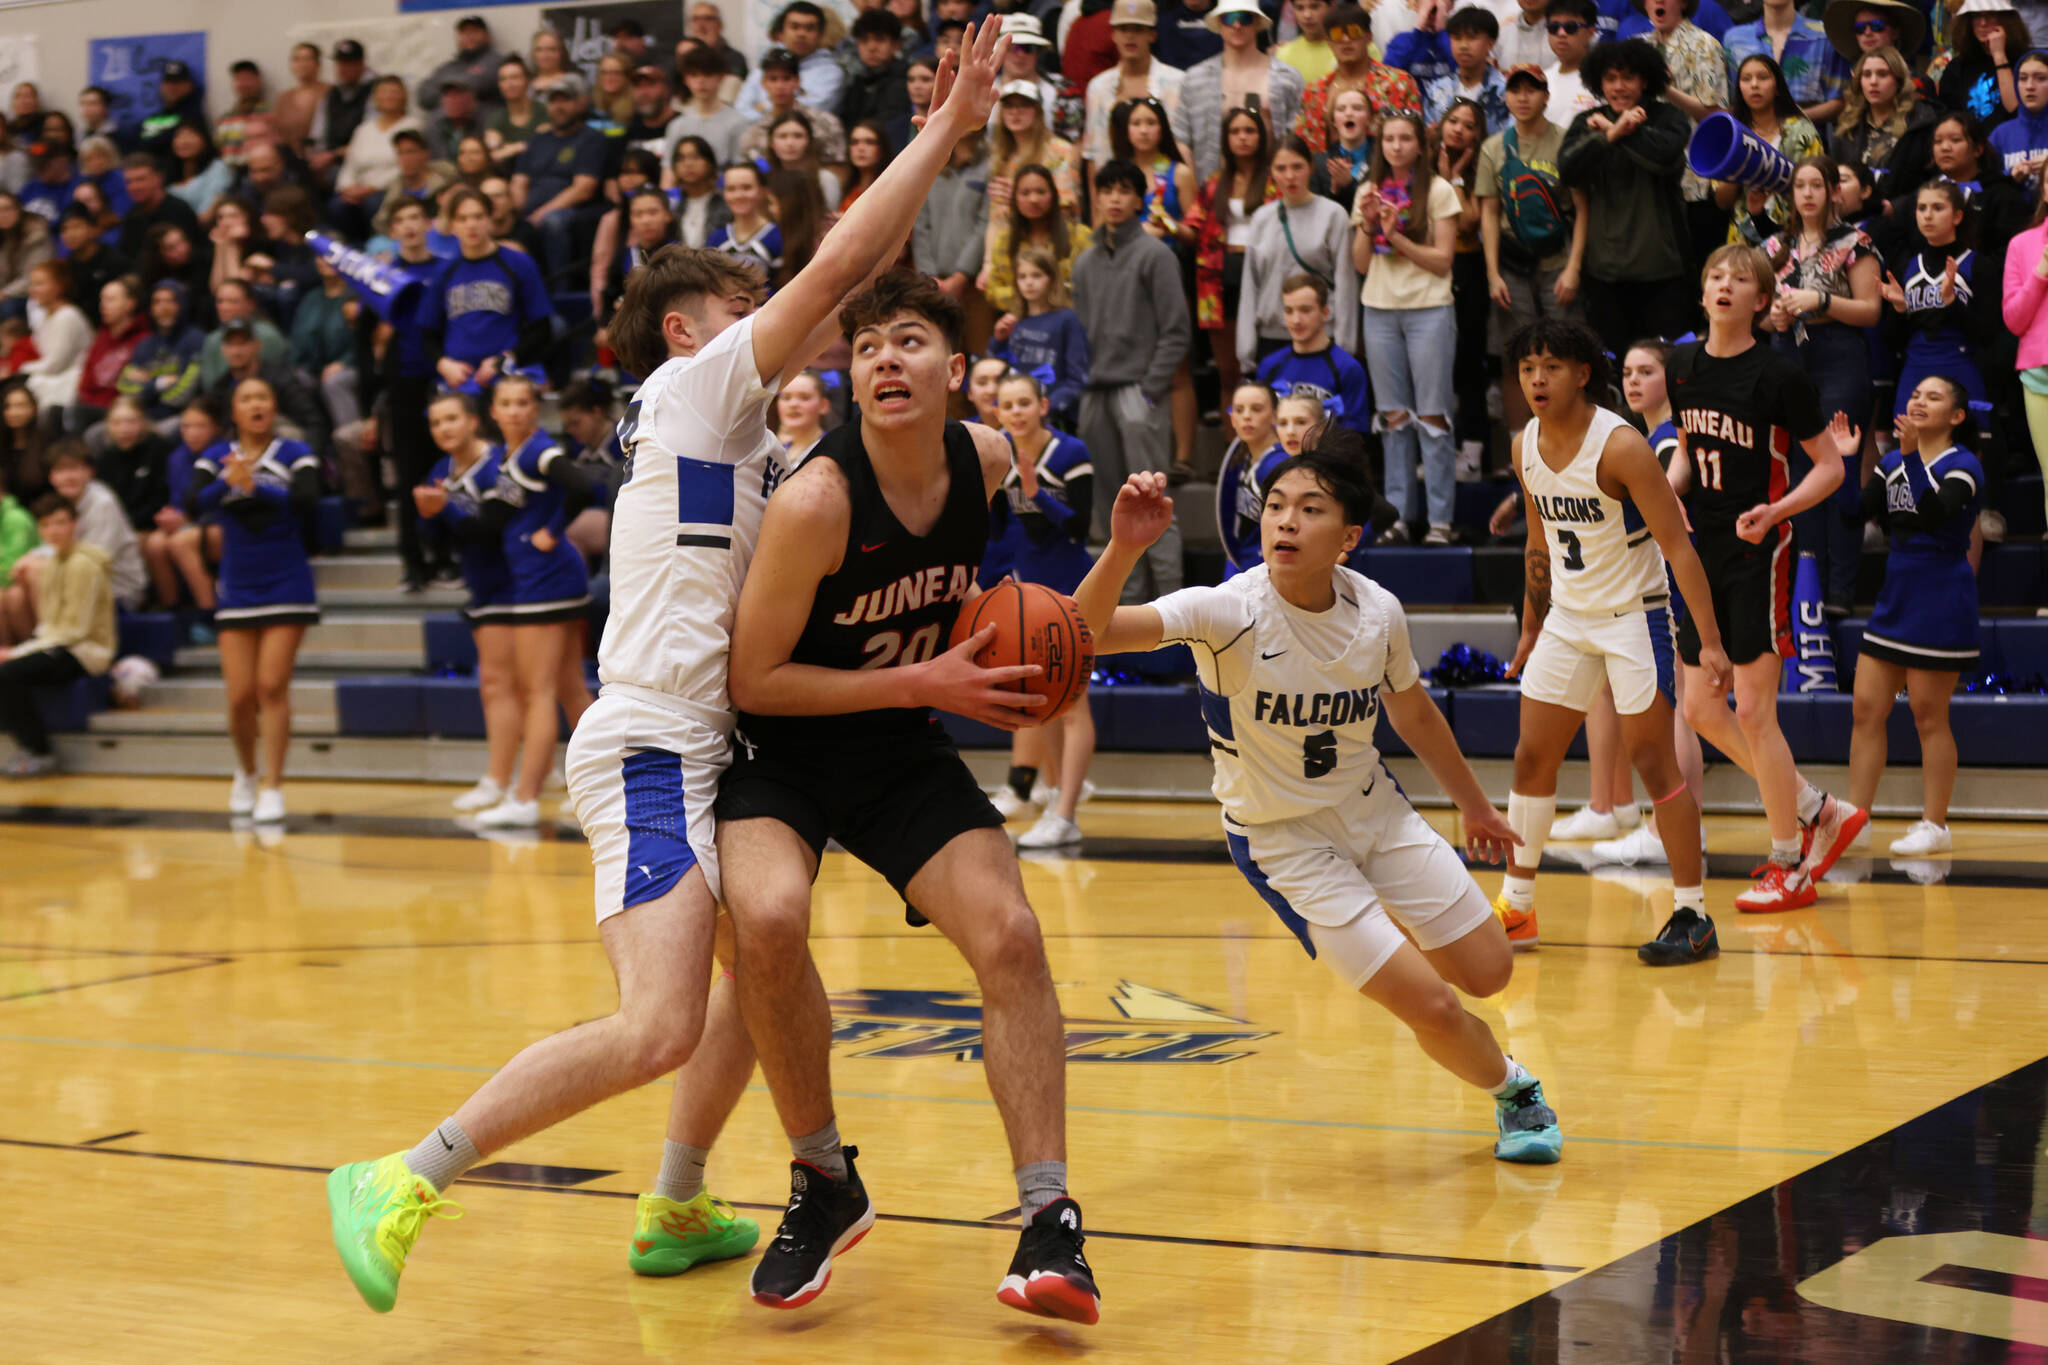 JDHS senior Orion Dybdahl goes in for a layup against TMHS during a conference game early this season. The two cross-town rivals are set to play games for the Region V Tournament this week. (Ben Hohenstatt / Juneau Empire)